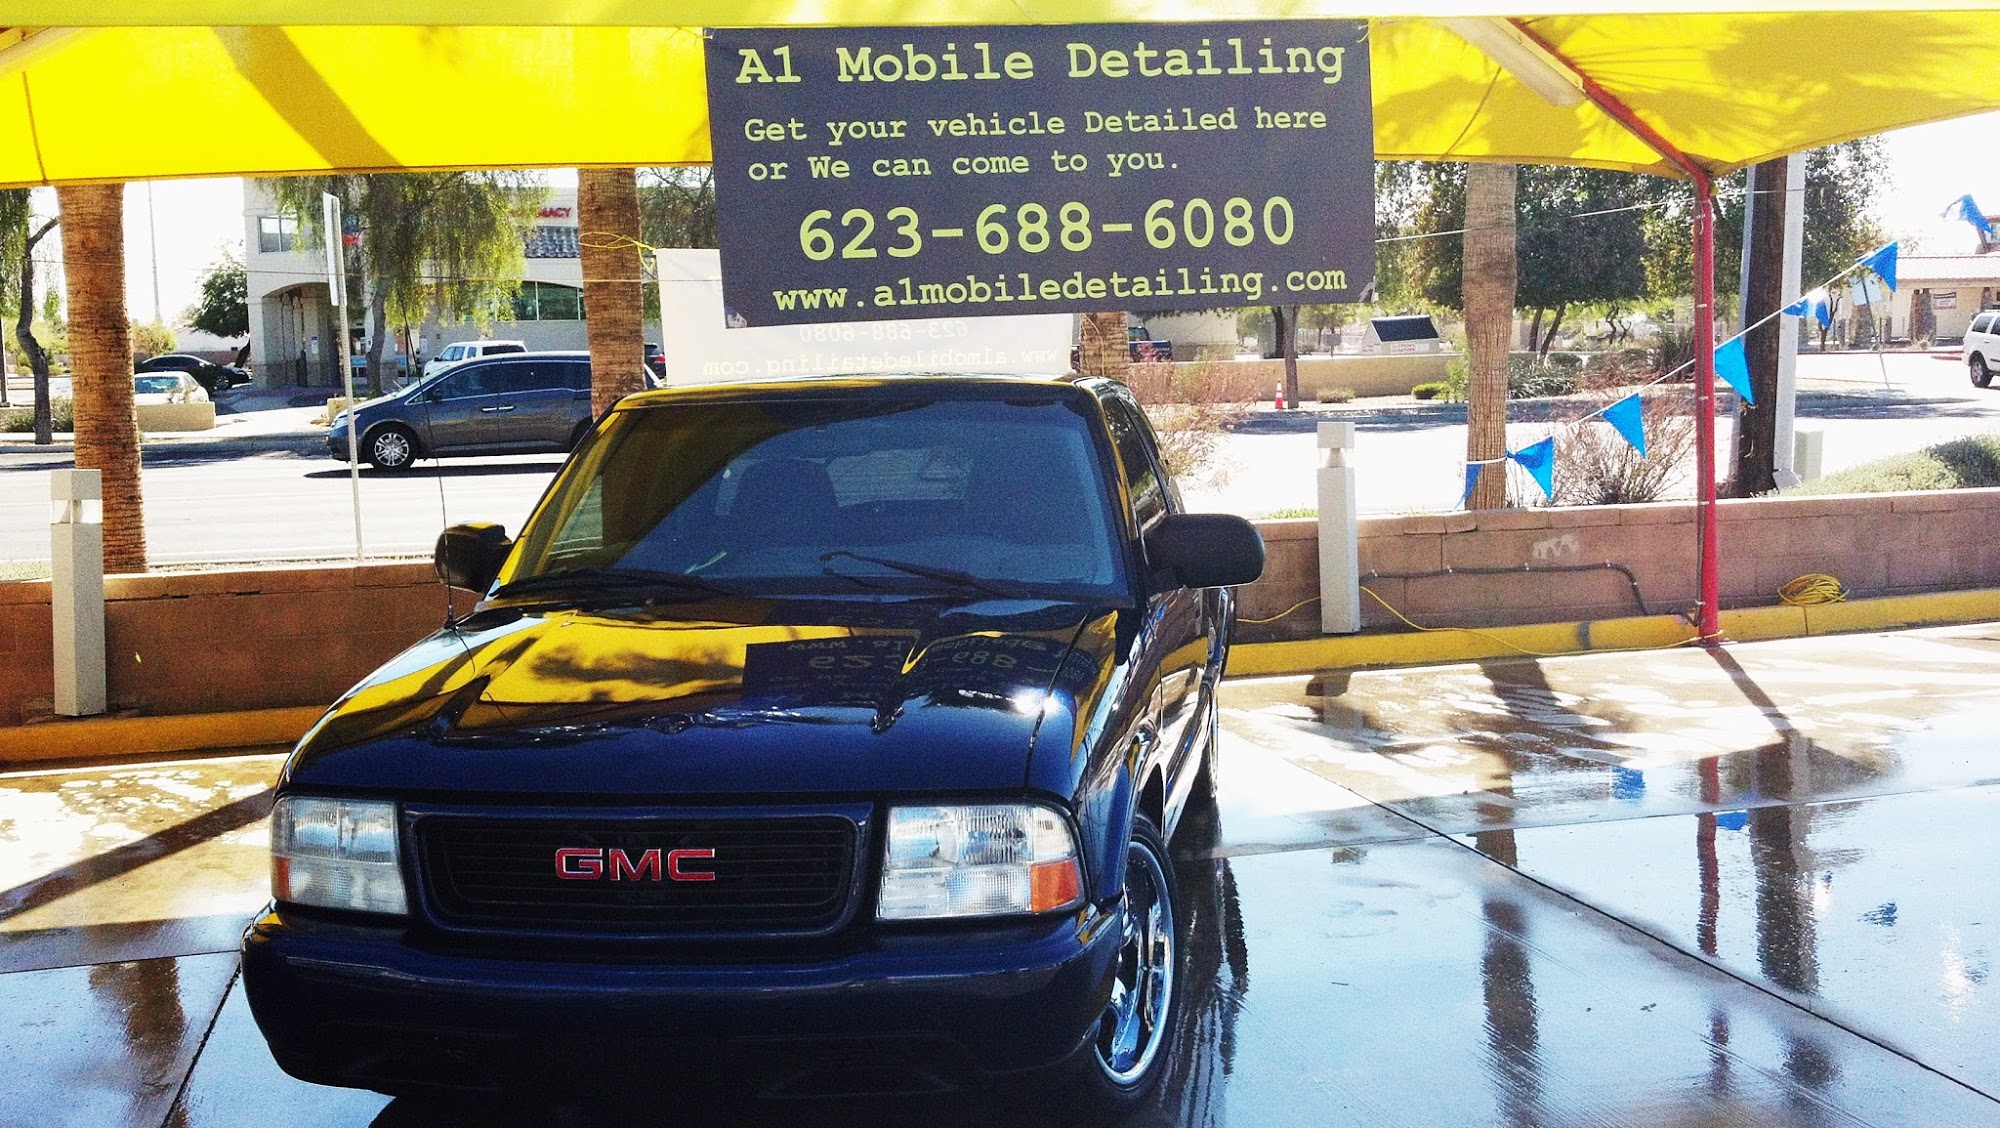 A1 Mobile Detailing